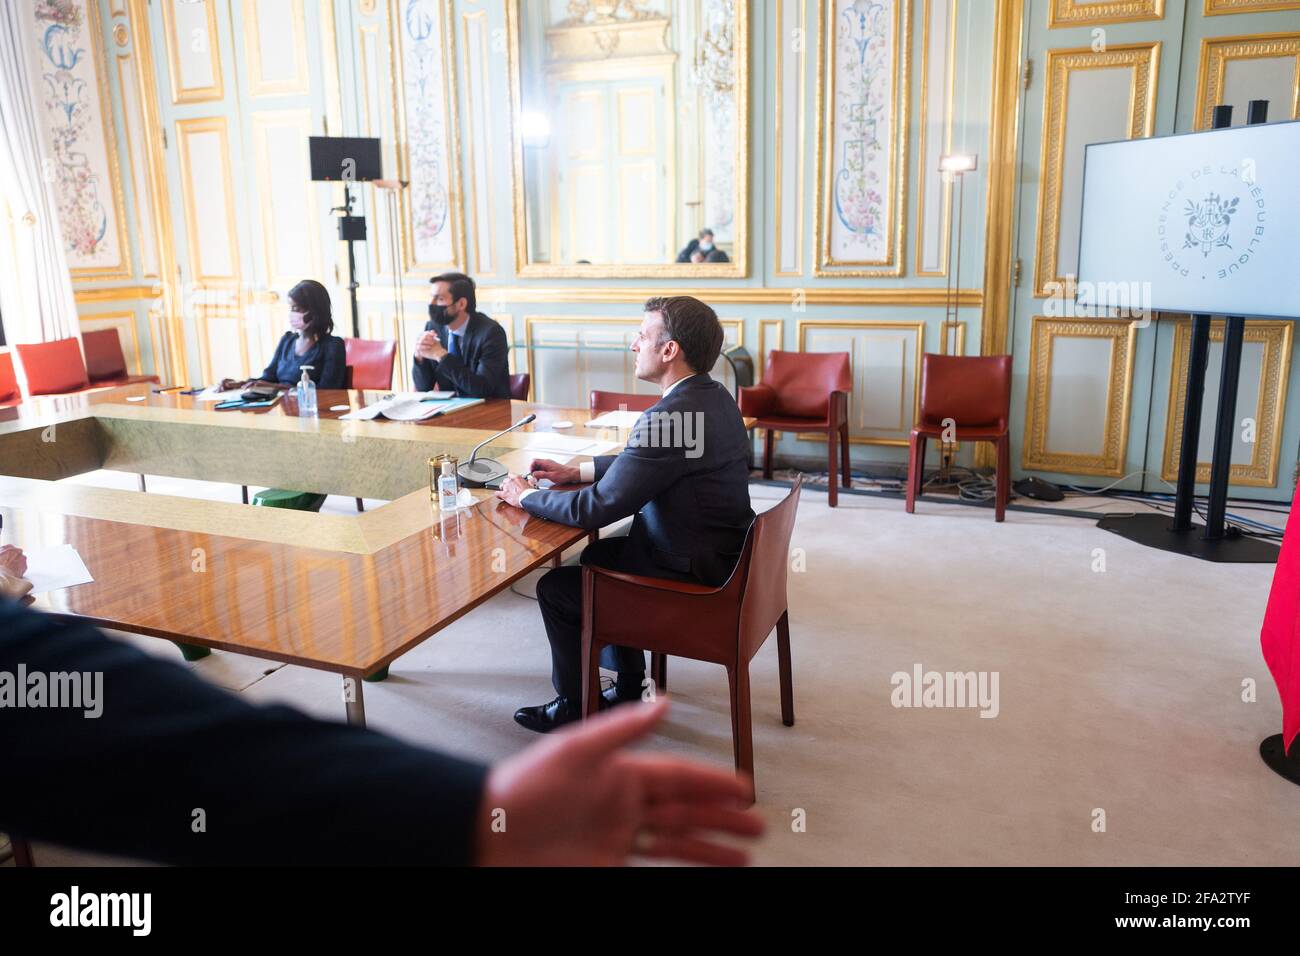 French President Emmanuel Macron listens to US President Joe Biden (on screen) speak during a virtual Earth Day Climate Summit, video conference call, at the Elysee Palace in Paris on April 22, 2021. President Joe Biden on April 22, 2021, sharply ramped up US ambitions on slashing greenhouse gas emissions, leading new pledges by allies at a summit he hopes brings the world closer to limiting climate change. Biden told a virtual Earth Day summit that the world's largest economy will cut emissions blamed for climate change by 50 to 52 percent by 2030 compared with 2005 levels. Photo by Romain Ga Stock Photo